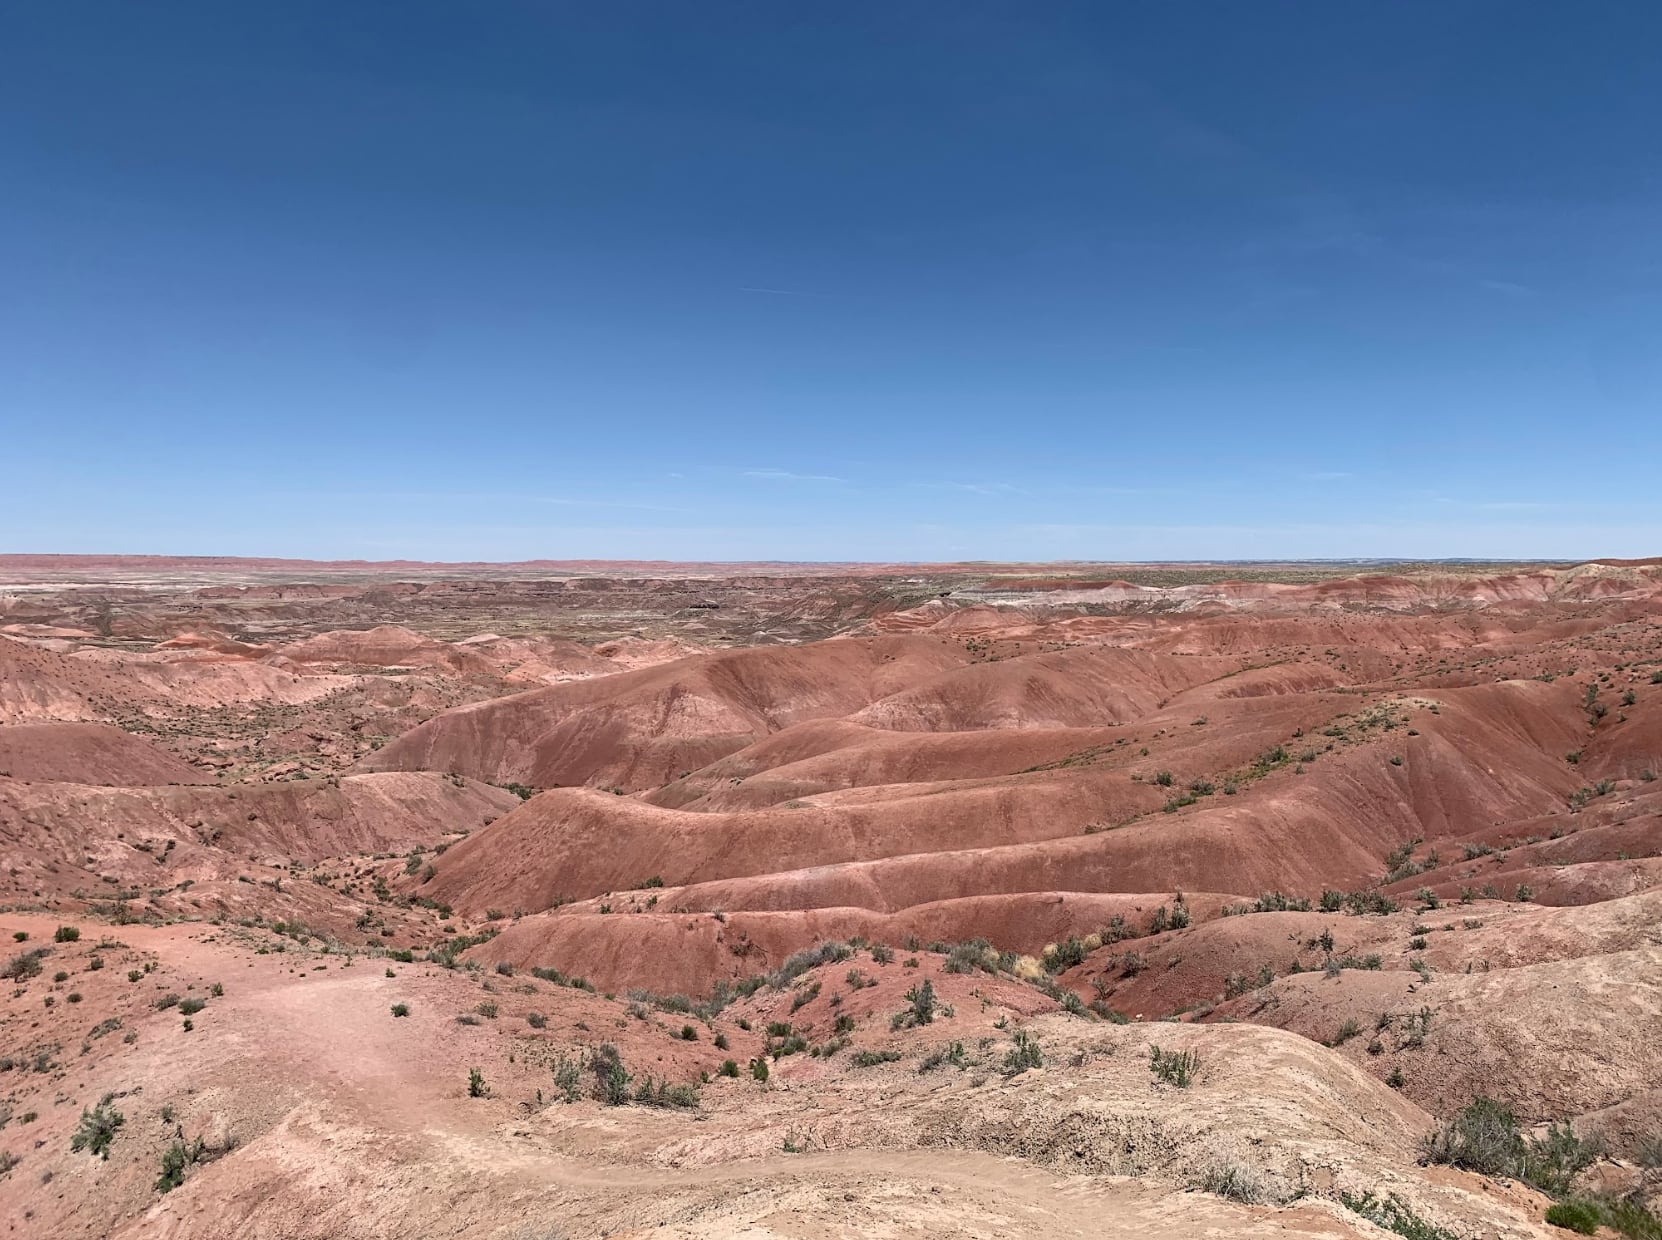 A view of the sprawling Petrified Forest National Park